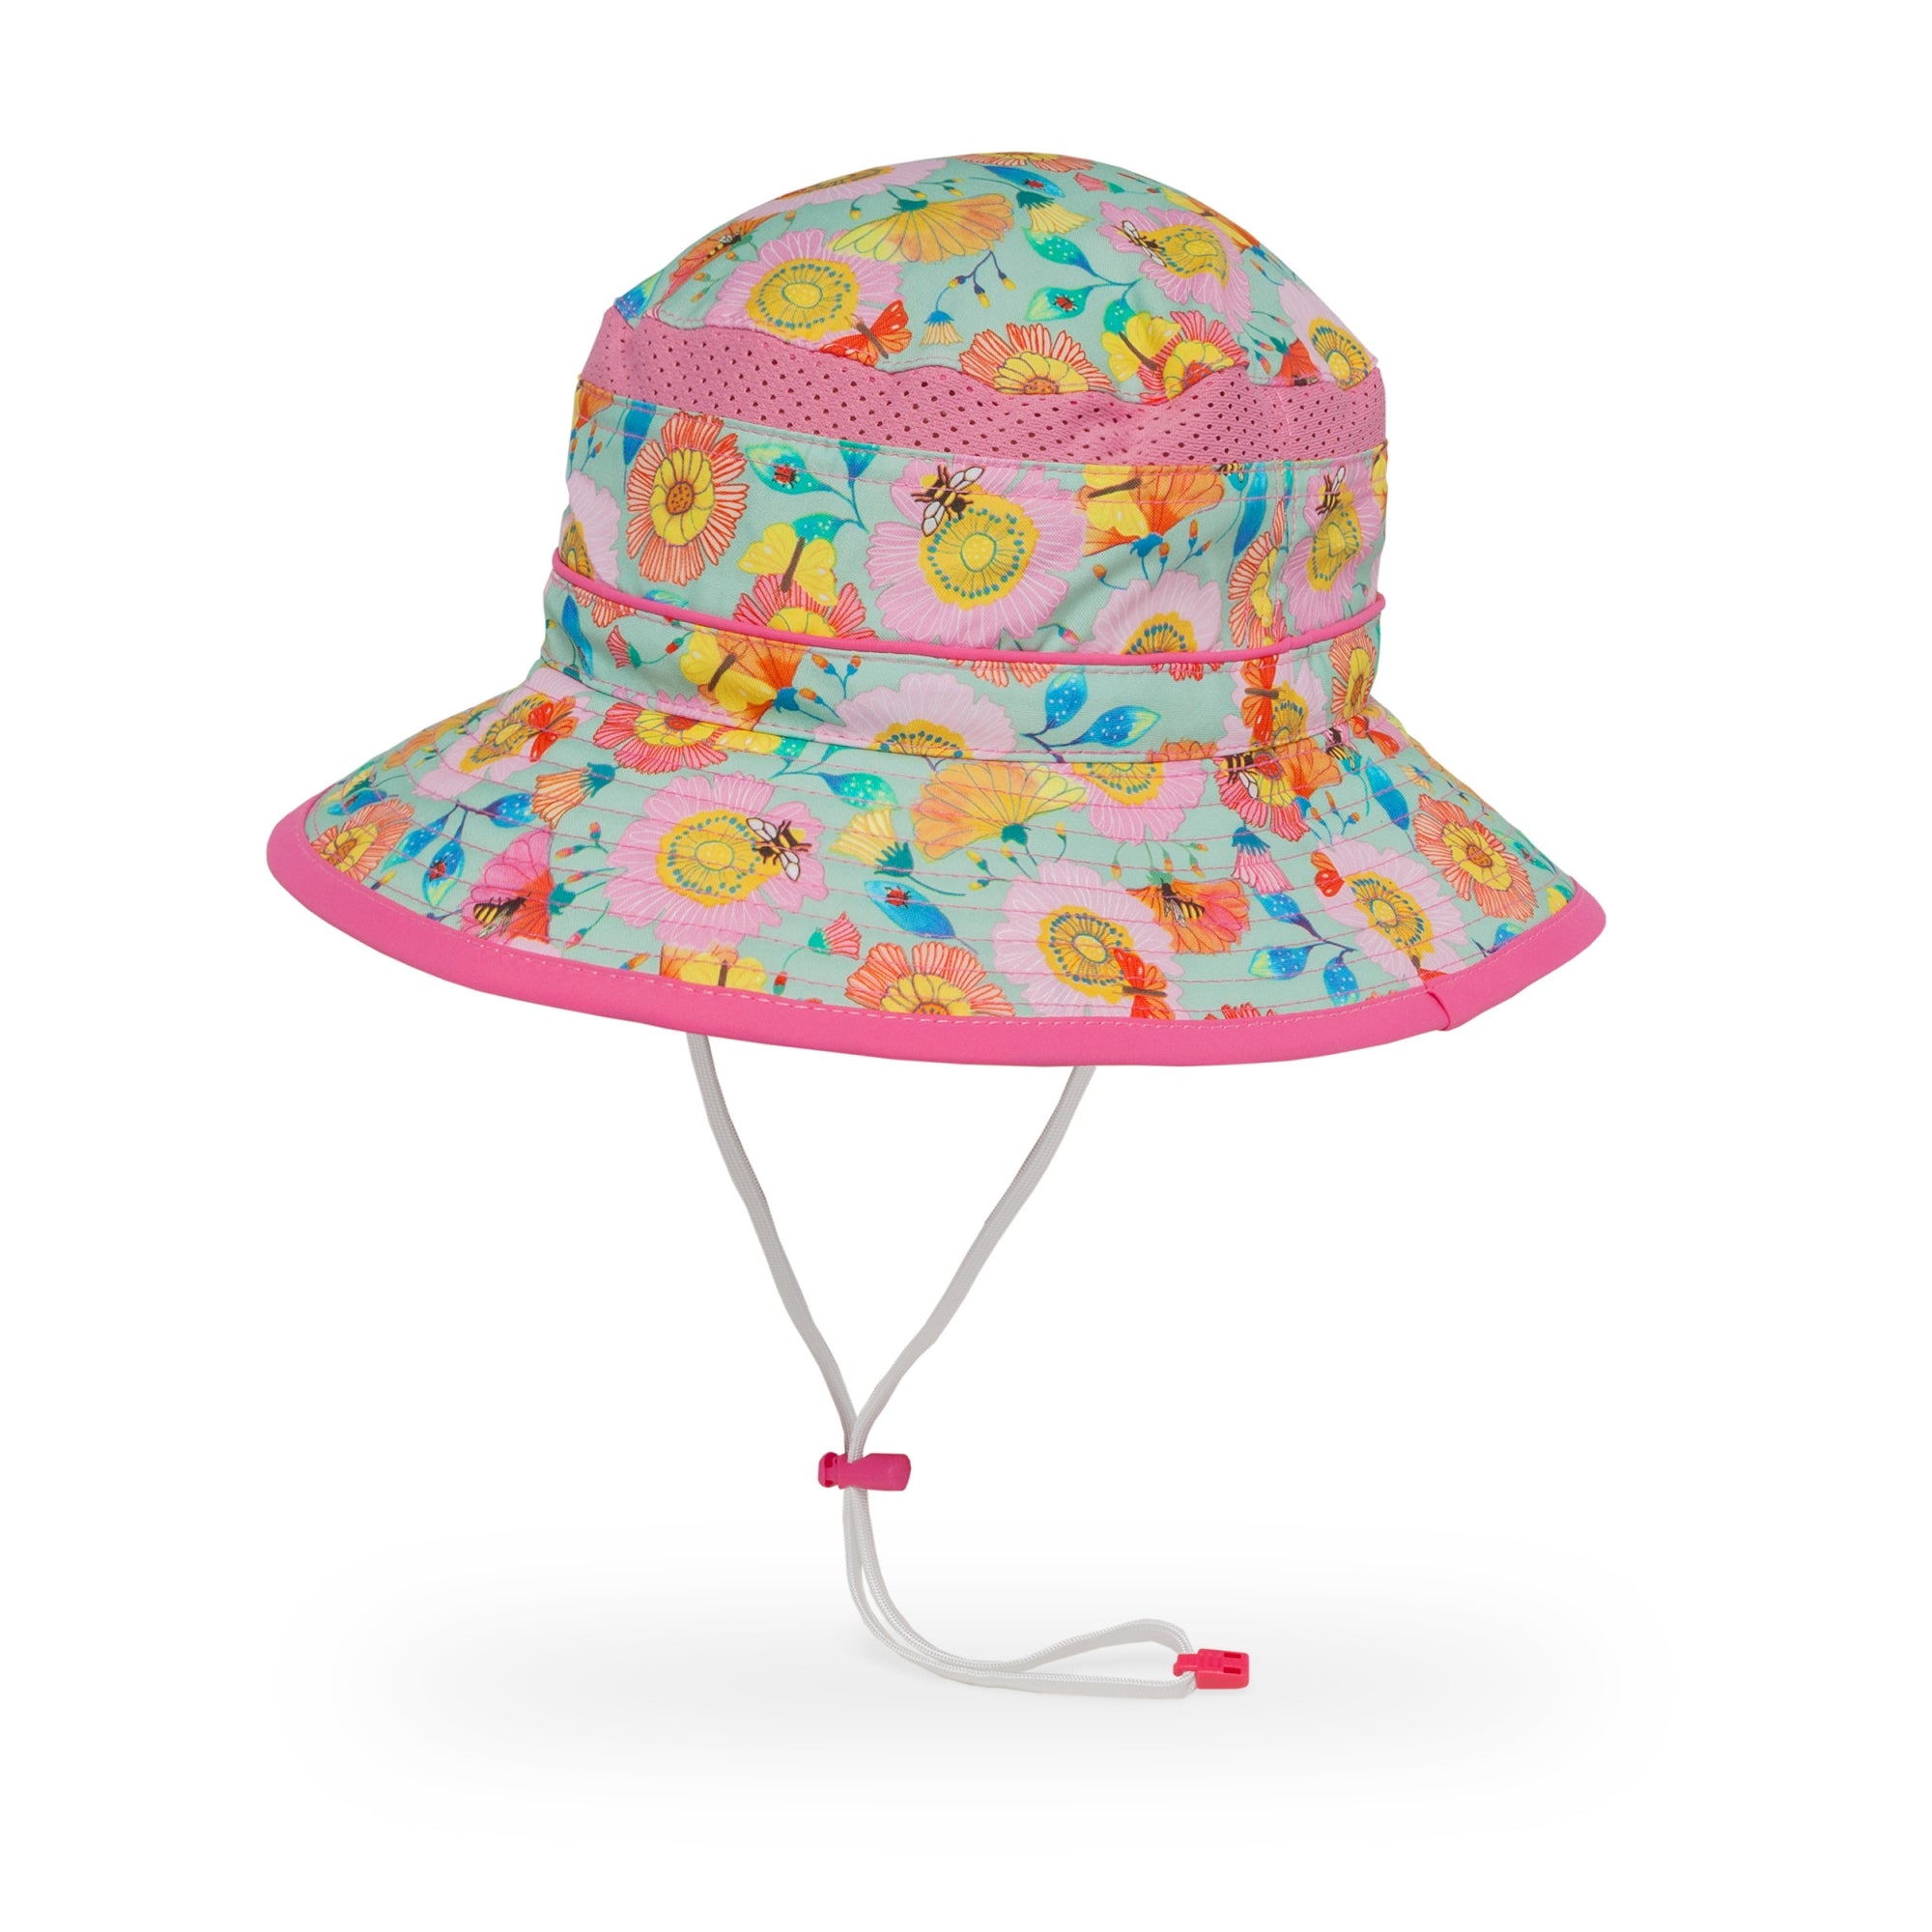 the sunday afternoons kids fun bucket hat in the color pollinators